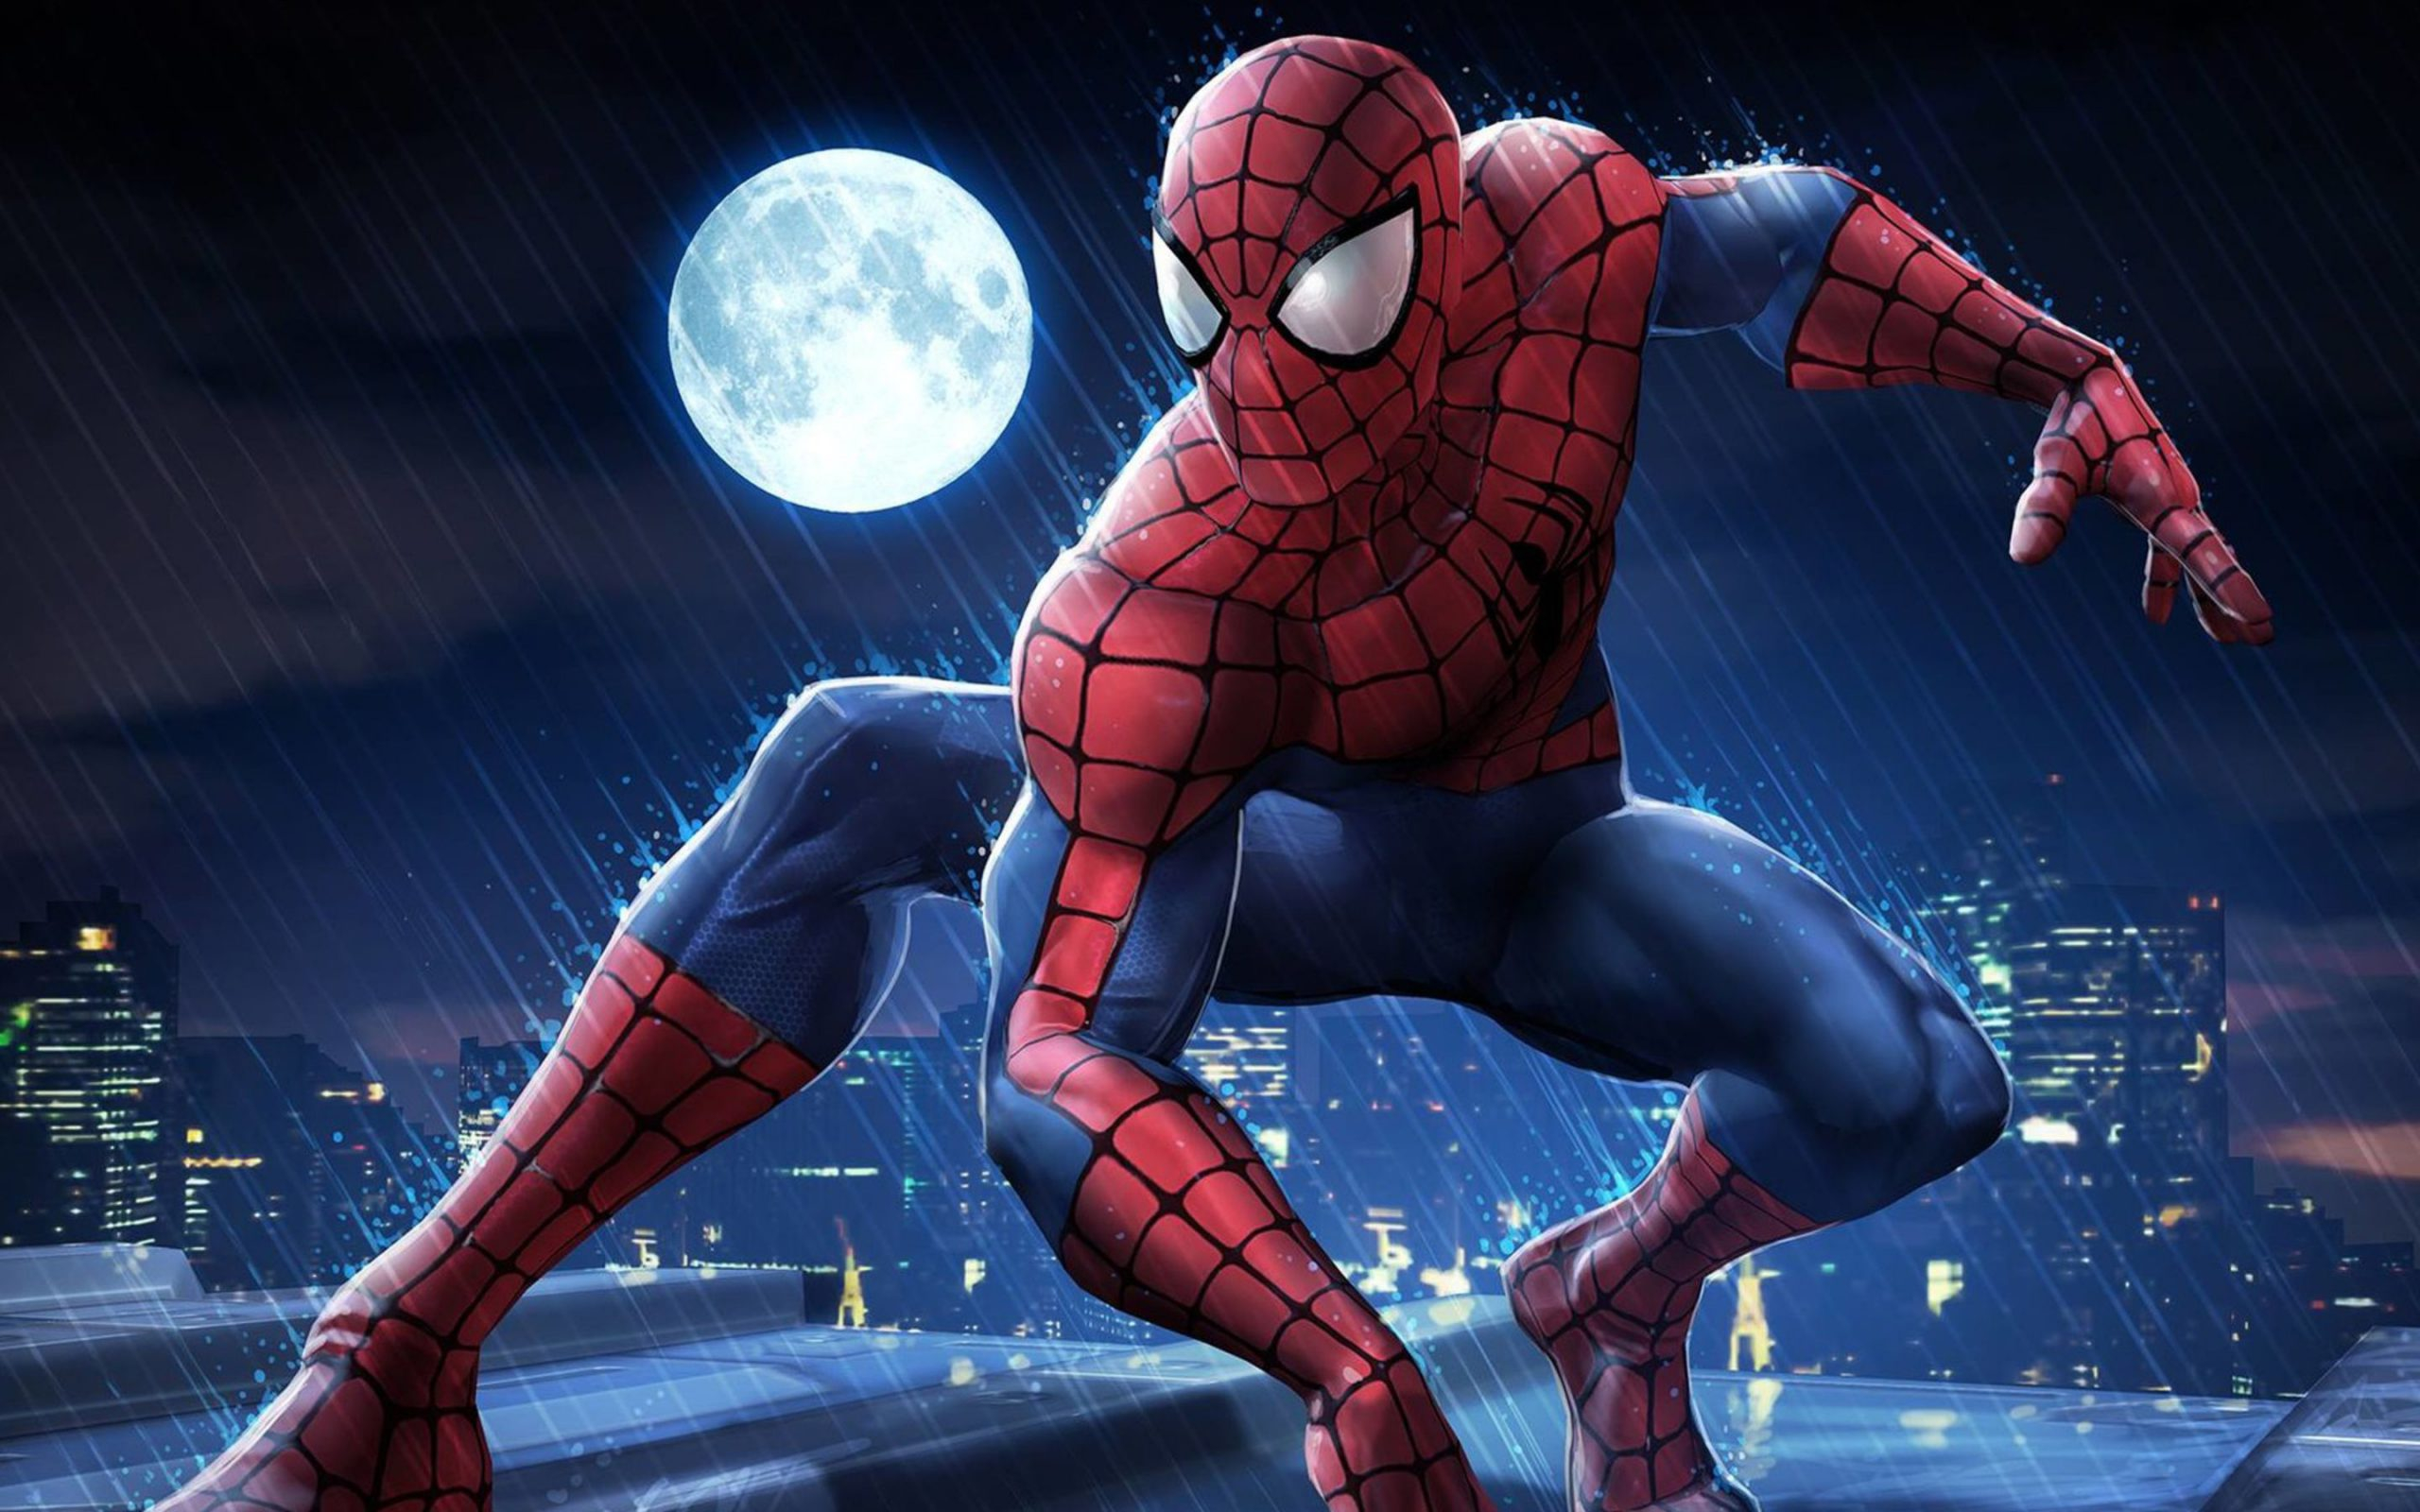 2560x1600 Spiderman Hd Wallpaper Awesome Free HD Wallpapers